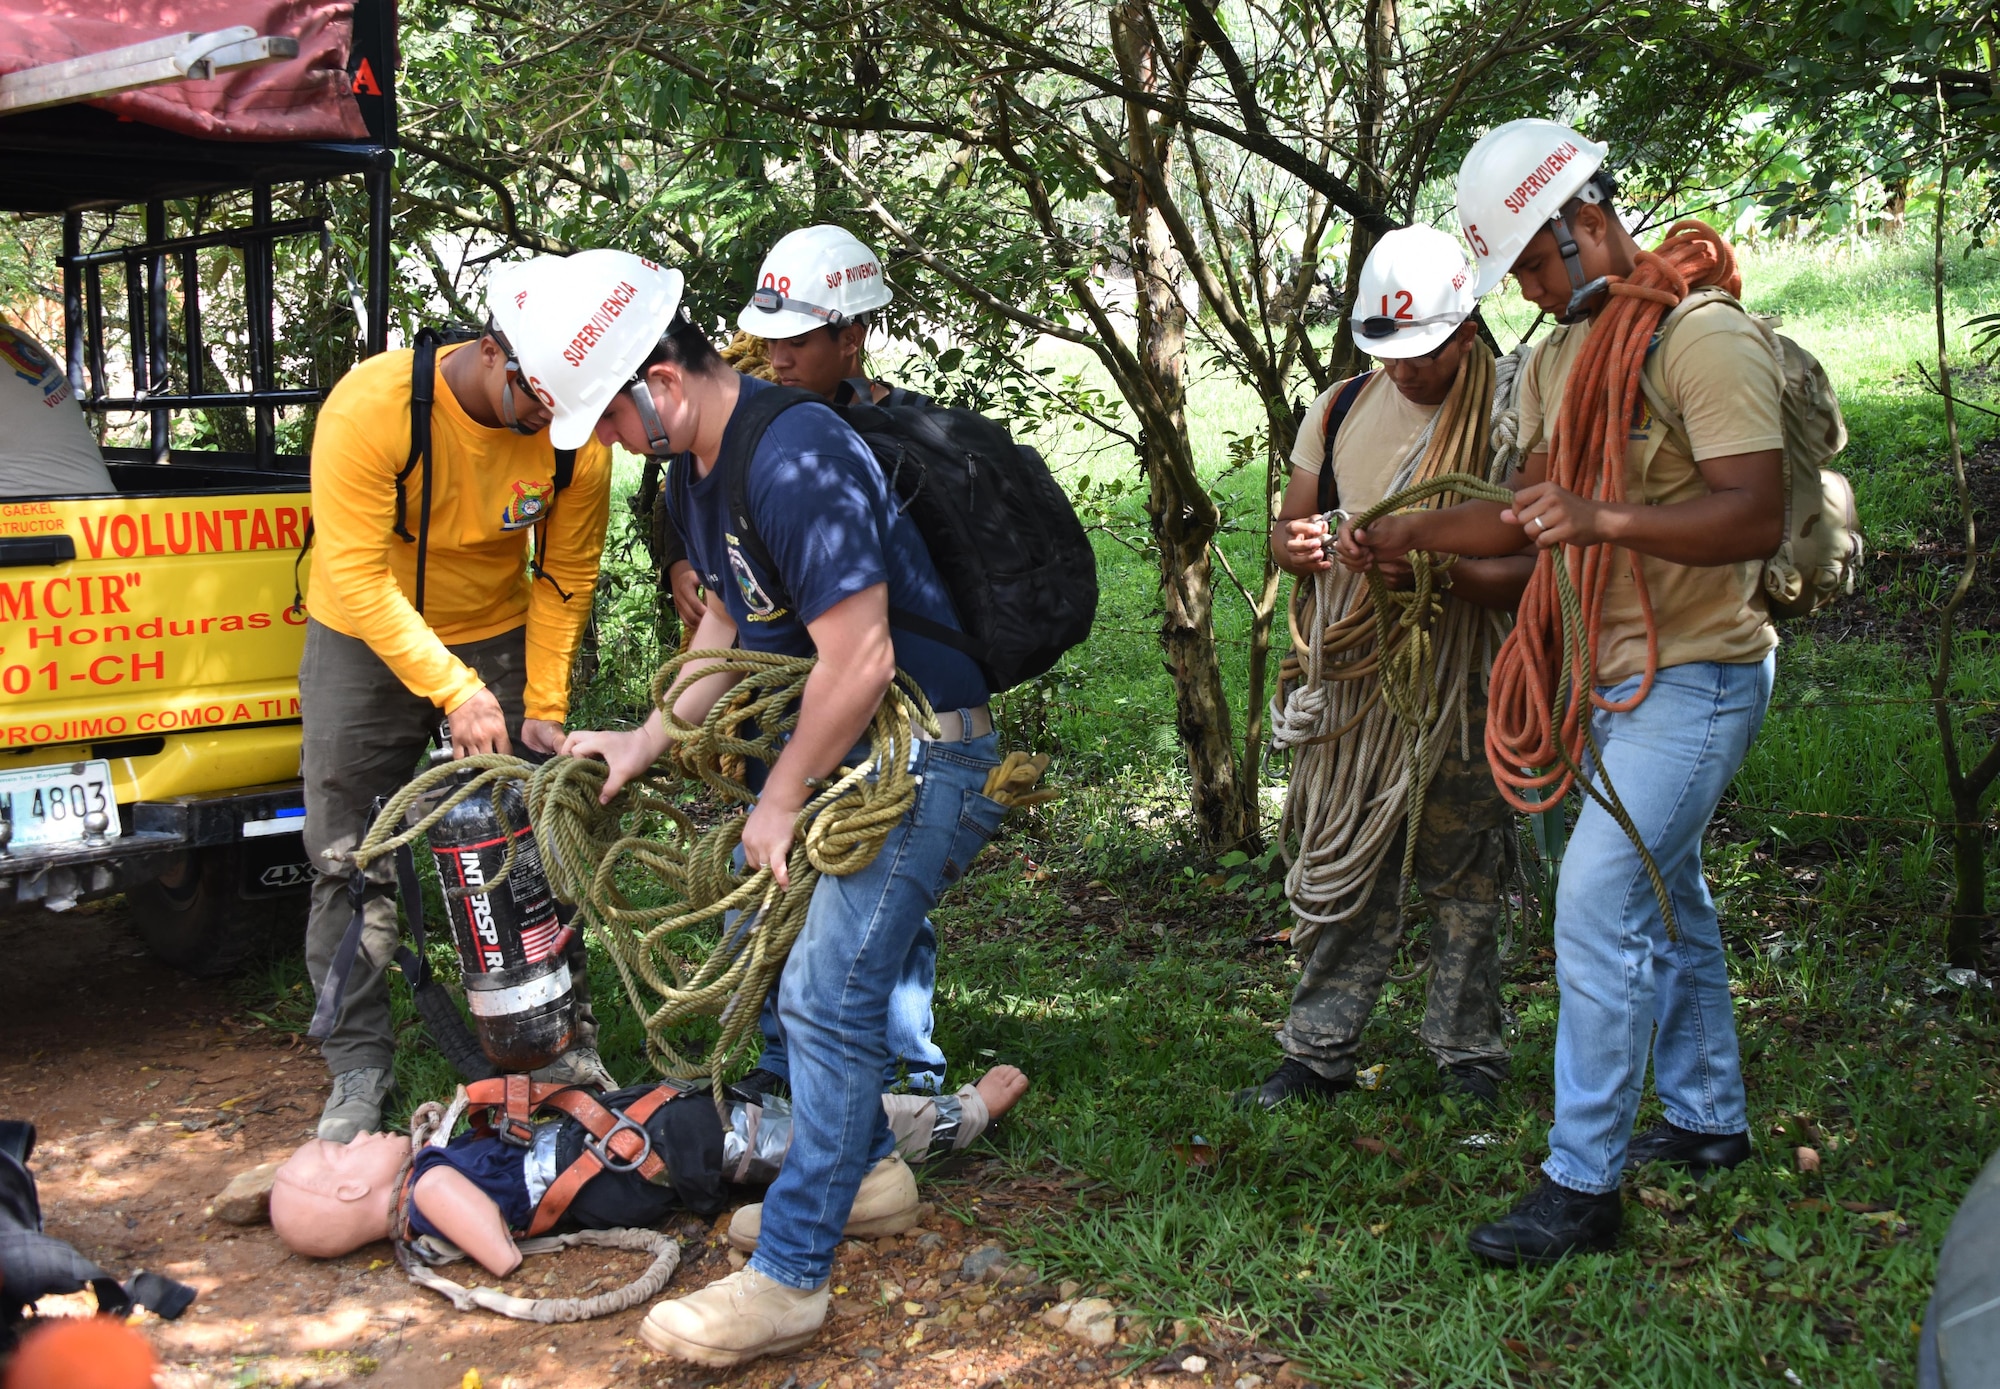 Honduran PUMCIR (Personal Utilizado en Misiones Contra Incendio y Rescate – Personnel Used in Fire and Rescue) volunteers prepare the ropes, SCUBA tanks and “Bartholomew” the 50-pound dummy they would use to conduct cave extraction search and rescue training in the Comayagua National Park near El Volcan, Honduras, Sept. 24, 2016. A number of the PUMCIR members on this particular exercise were part of the PUMCIR ELITE-RESCUE team. (U.S. Air Force photo by Capt. David Liapis)